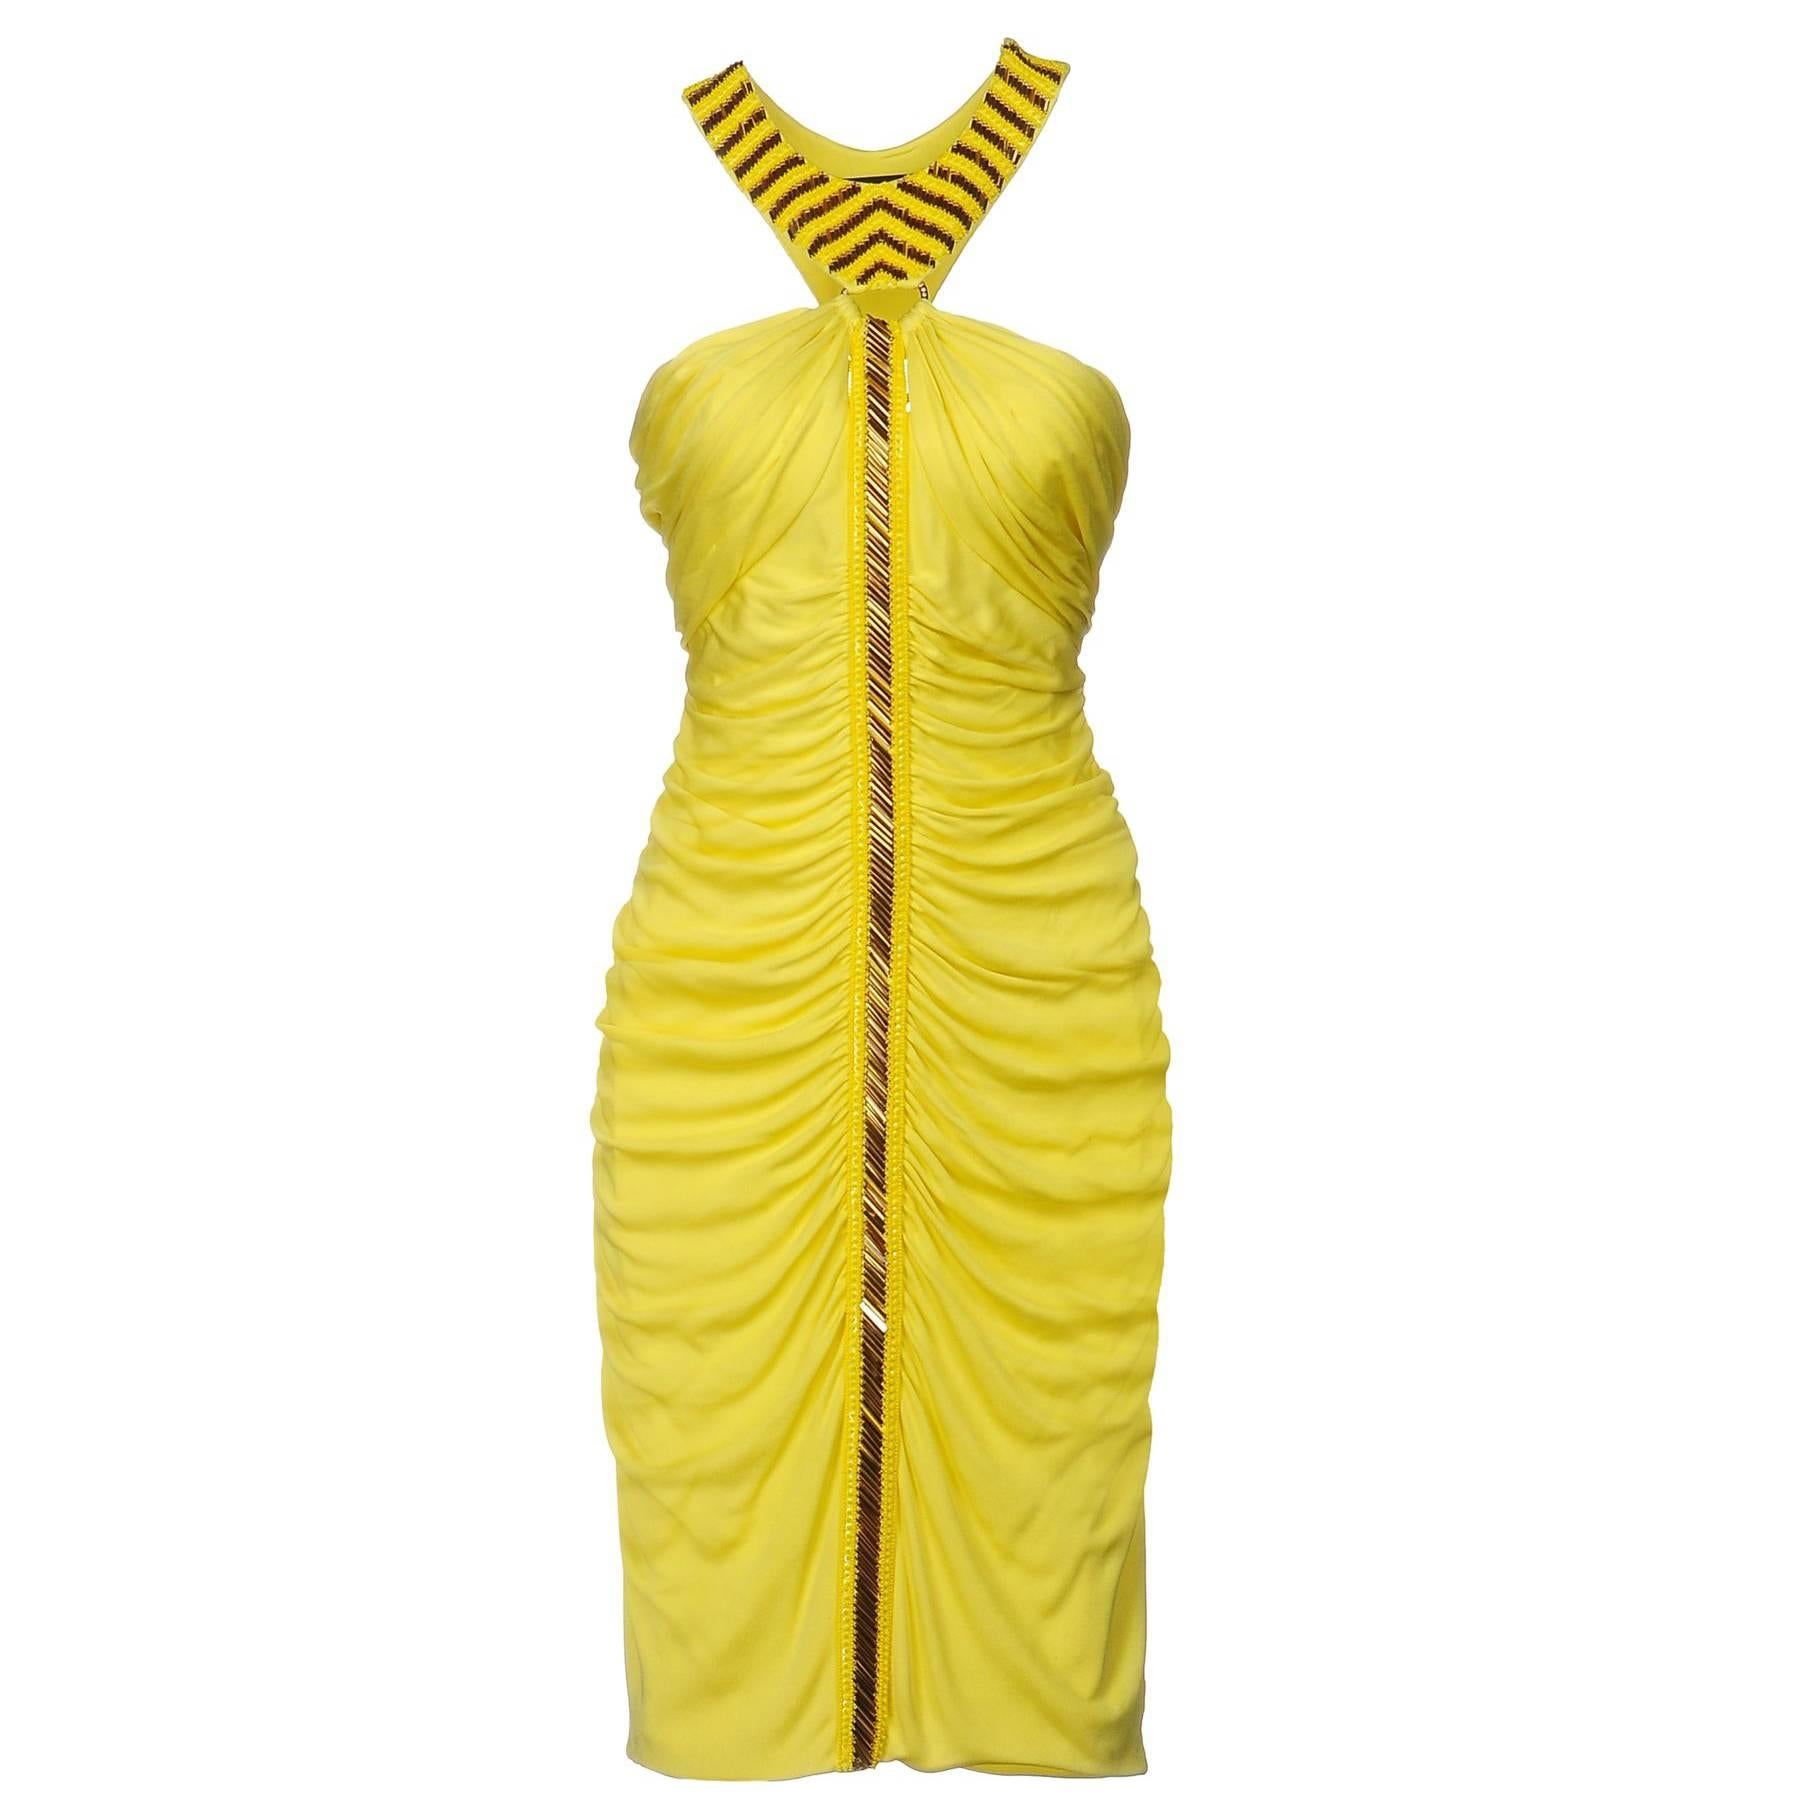 New VERSACE Beaded Cocktail Stretch Yellow Ruched Dress 42 - US 6